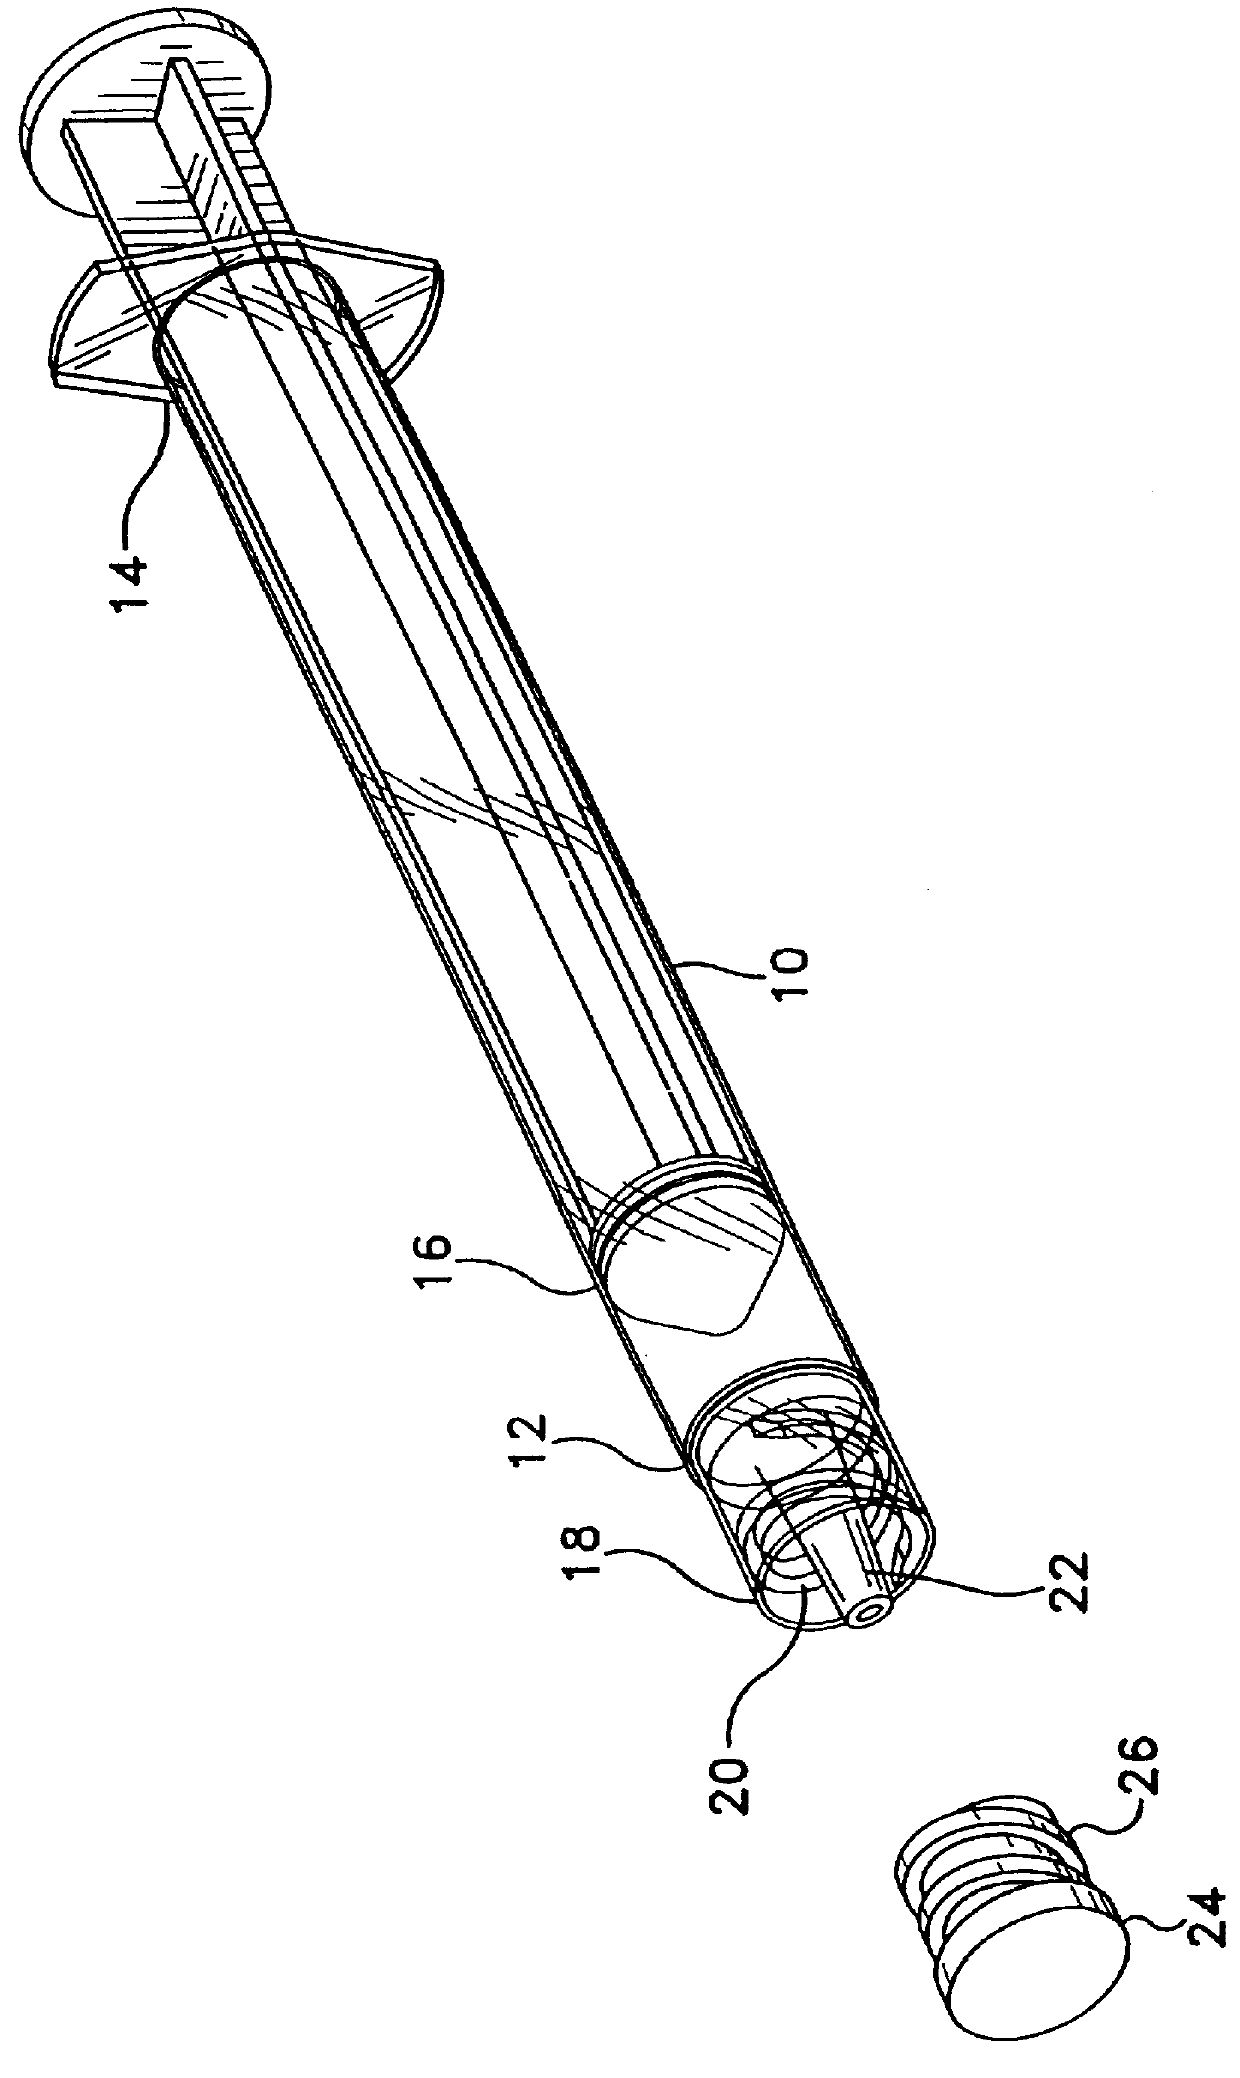 Protective sealing barrier for a syringe